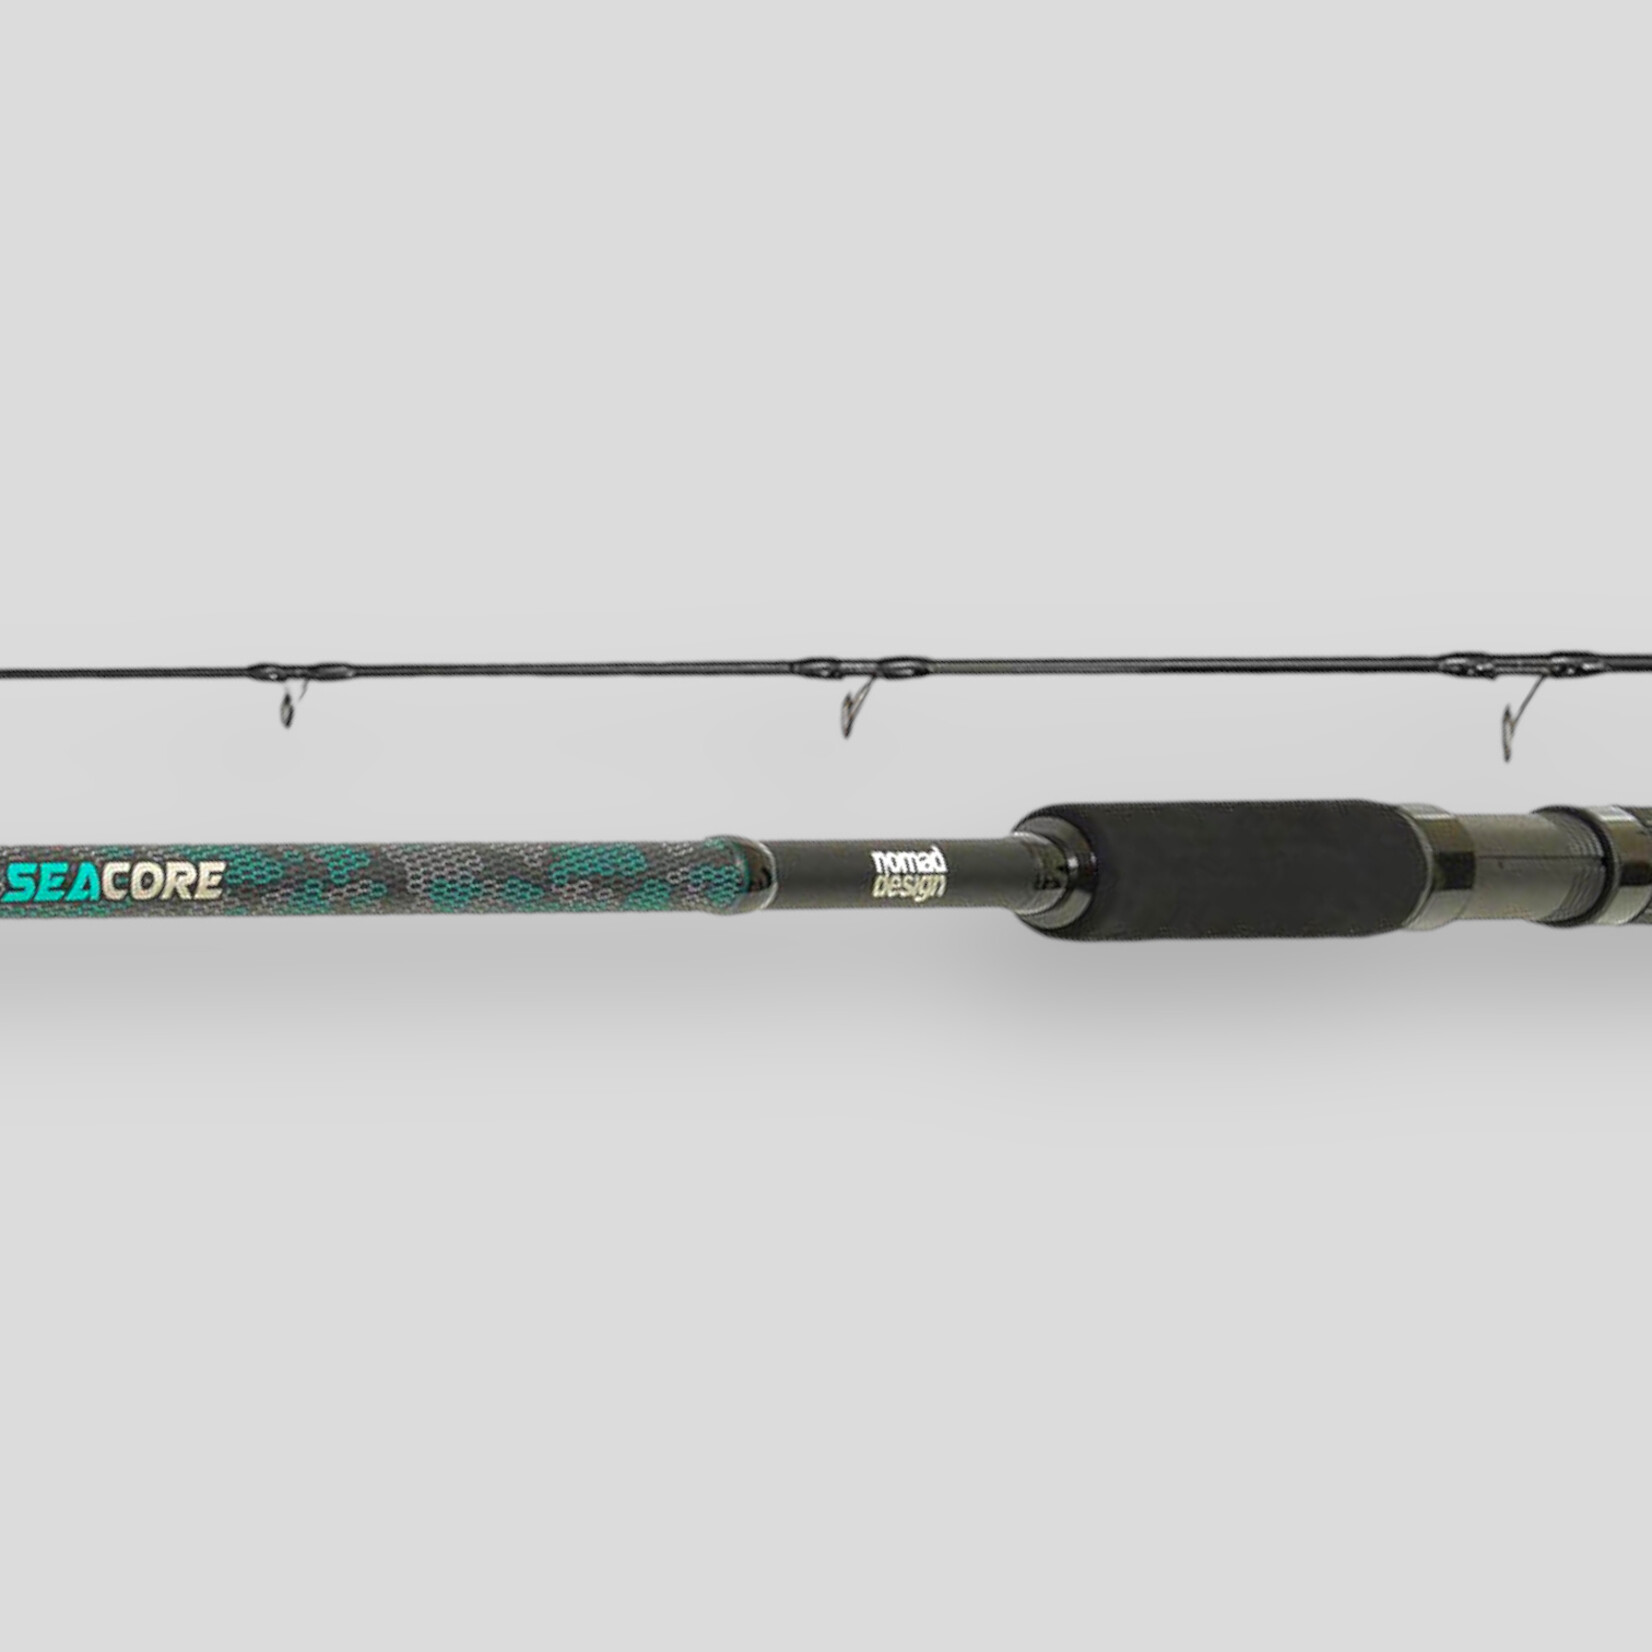 Nomad Nomad Seacore All Round Spin Rod